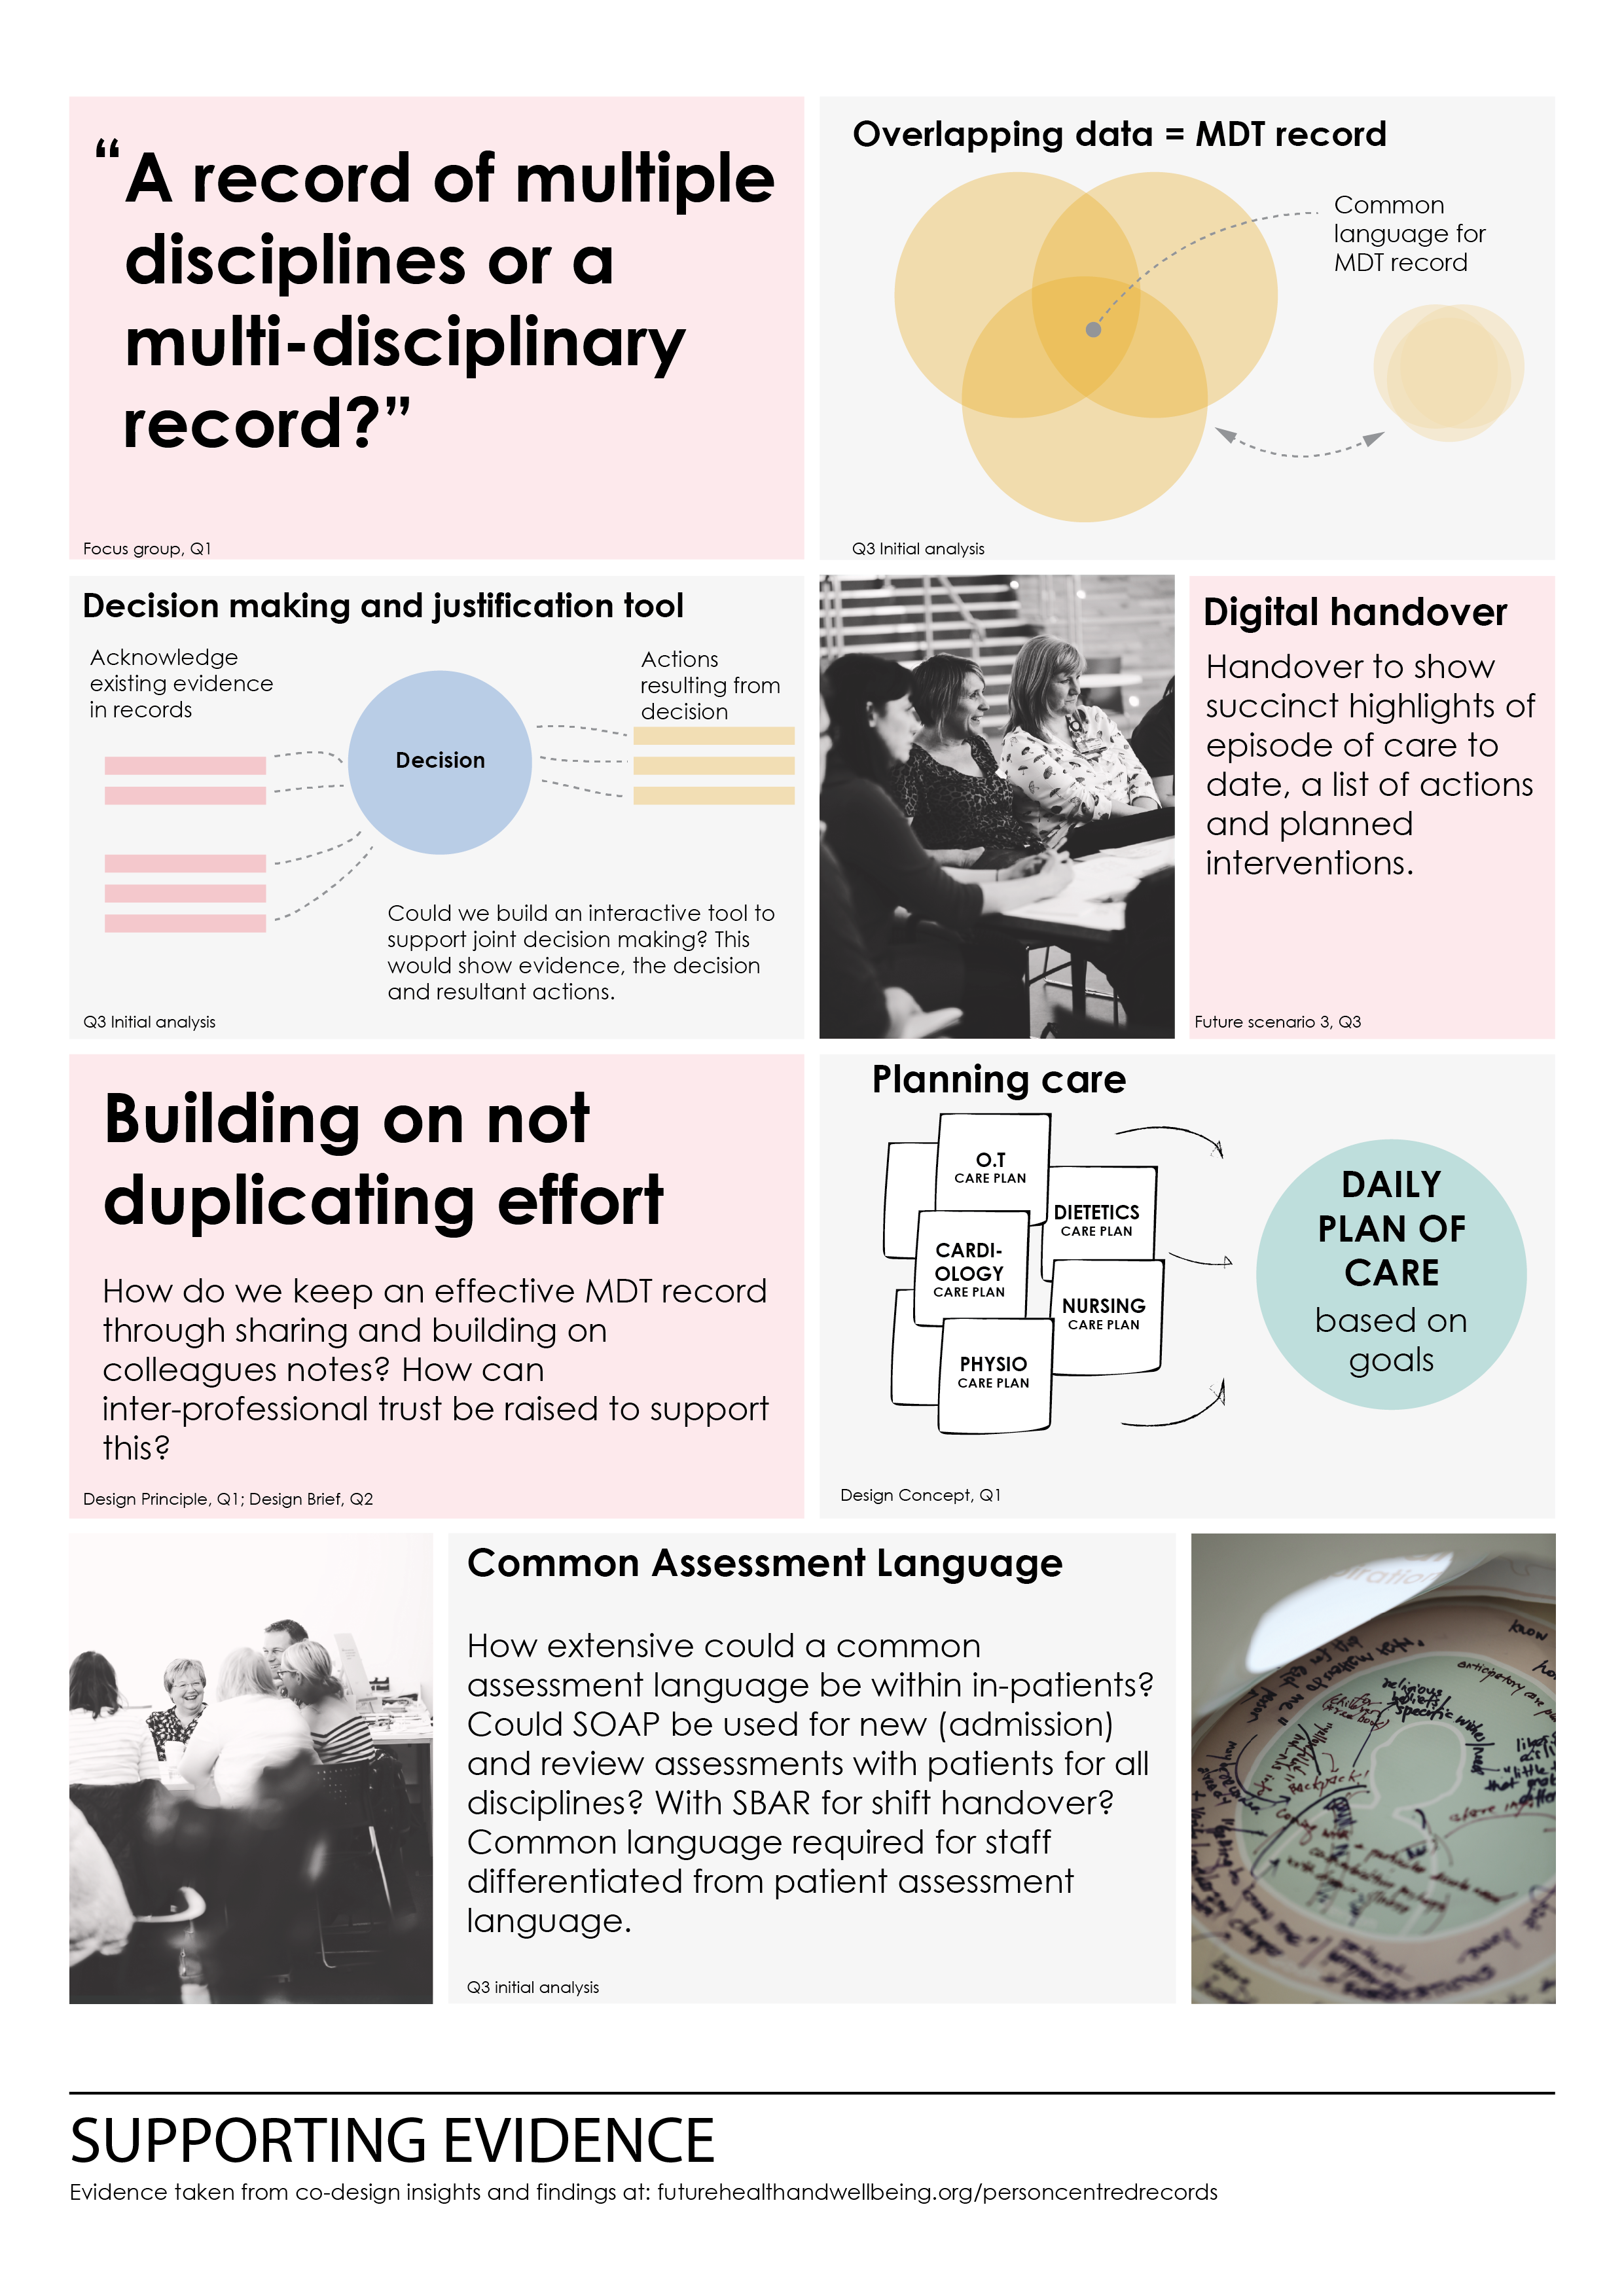 recommendations and evidence_common language 2.png